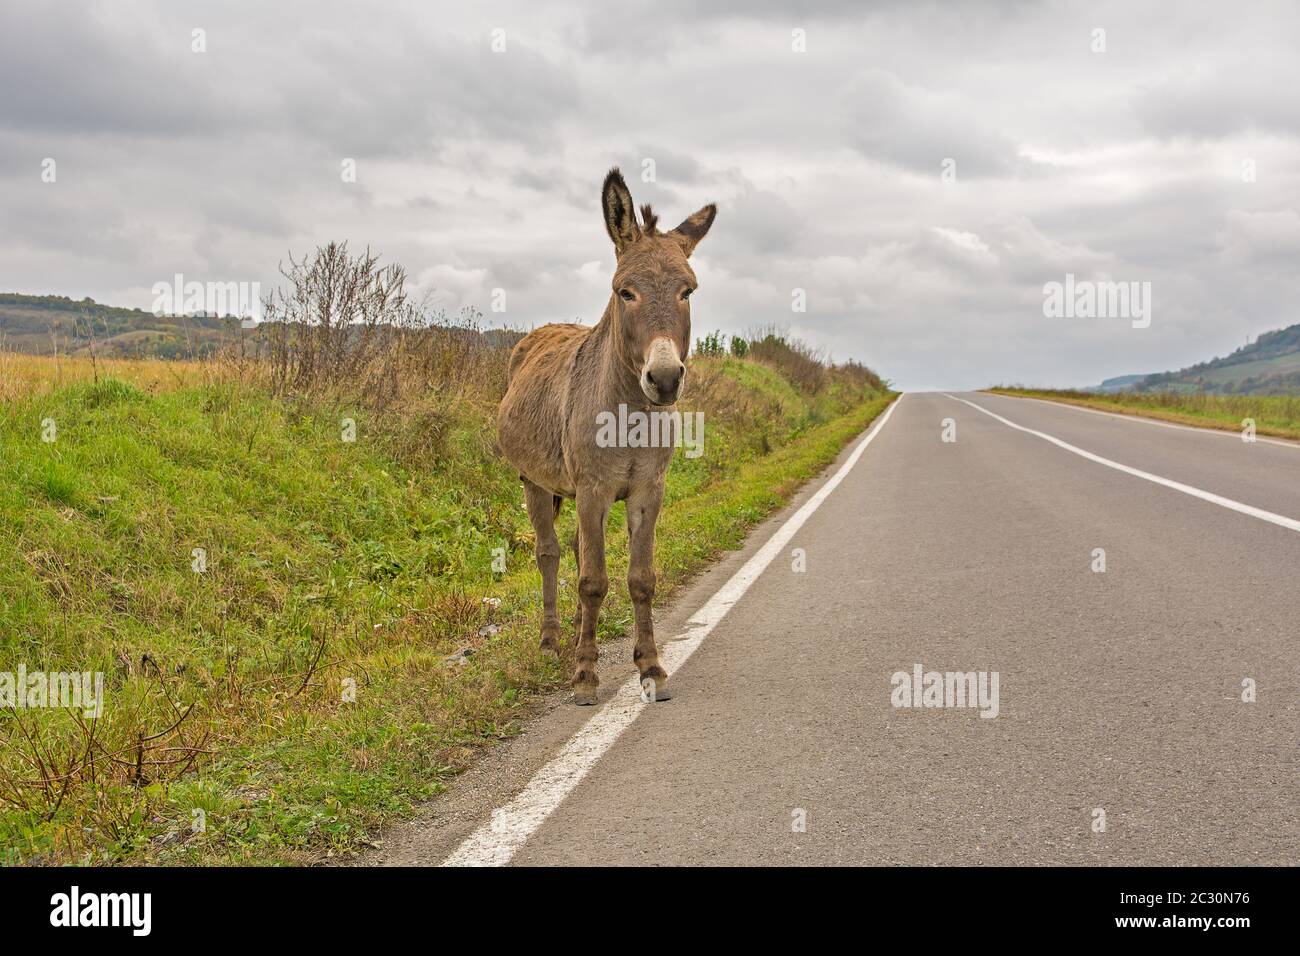 Lonely donkey walking on the highway on a cloudy autumn day. Concept for being lost, confused or loneliness Stock Photo